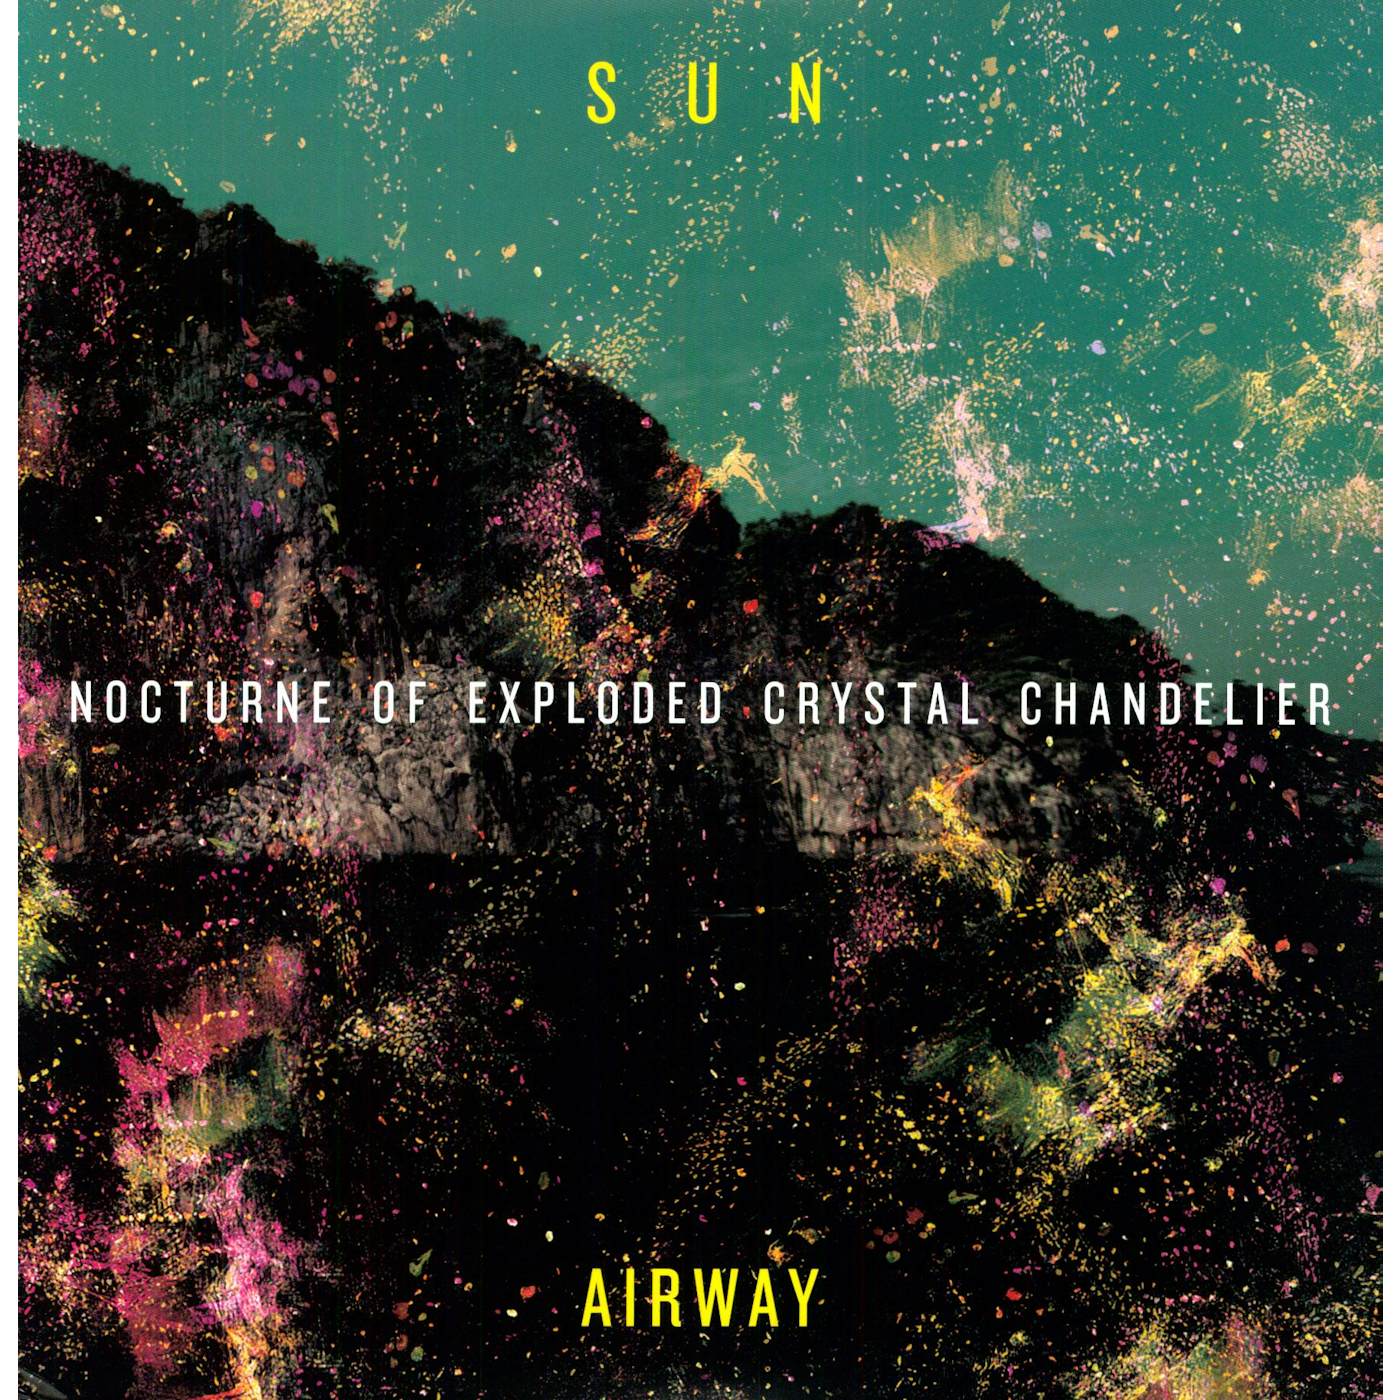 Sun Airway Nocturne of Exploded Crystal Chandelier Vinyl Record